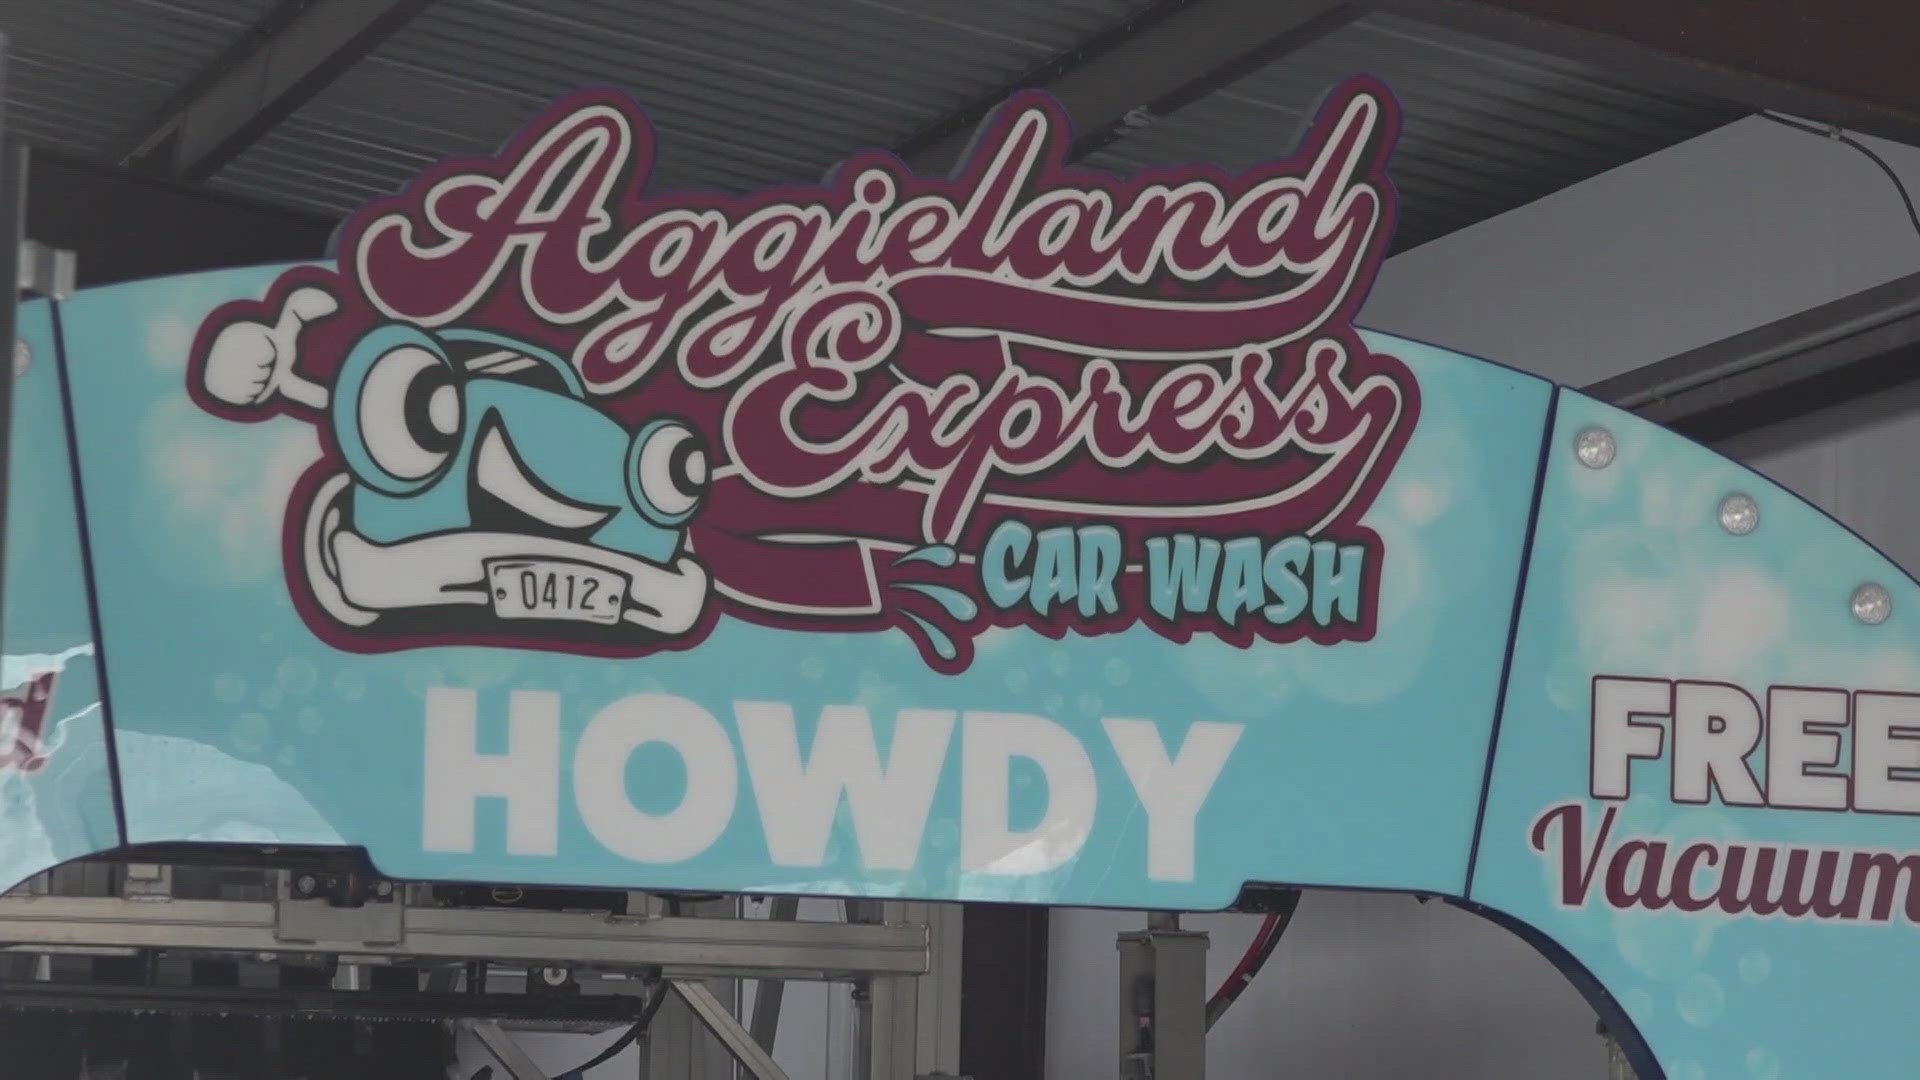 Aggieland Express Car wash is donating 100% of proceeds to the Salvation Army's Food Pantry this week.